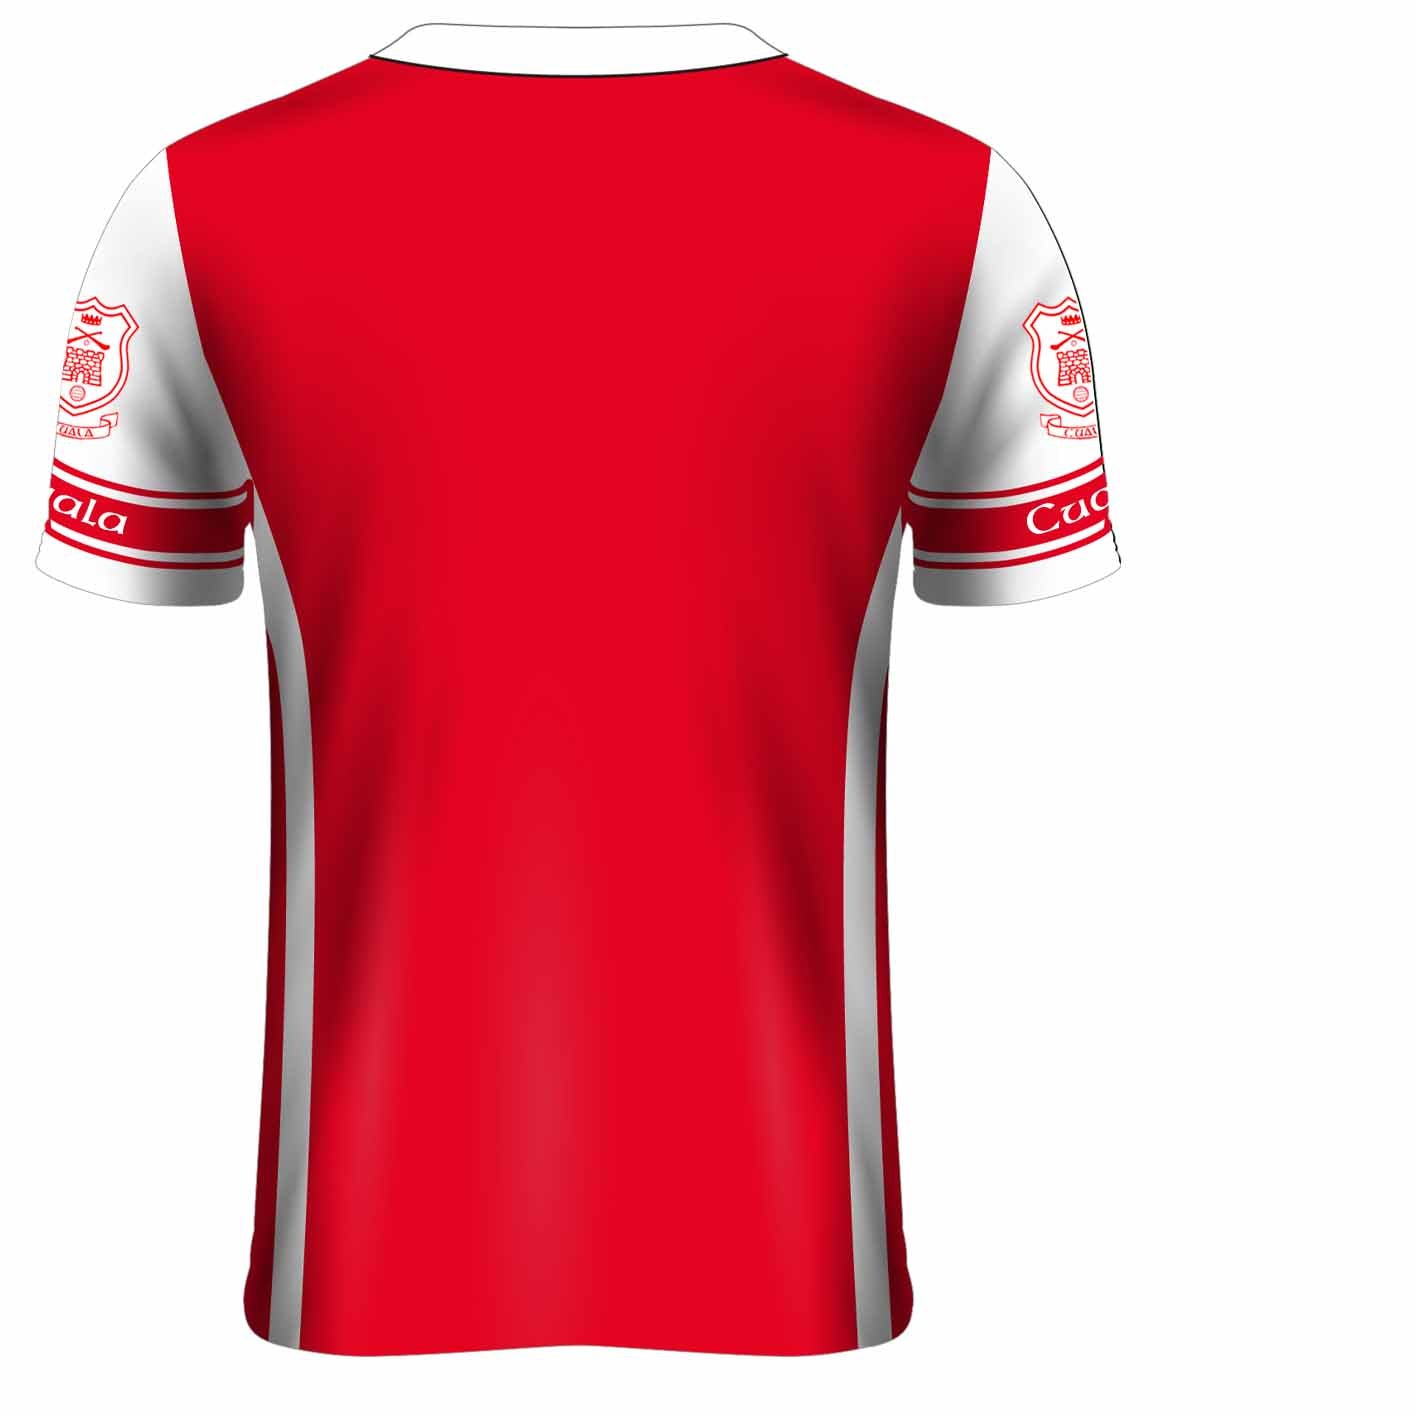 Mc Keever Cuala GAA LGFA Official Jersey - Womens - Red/White